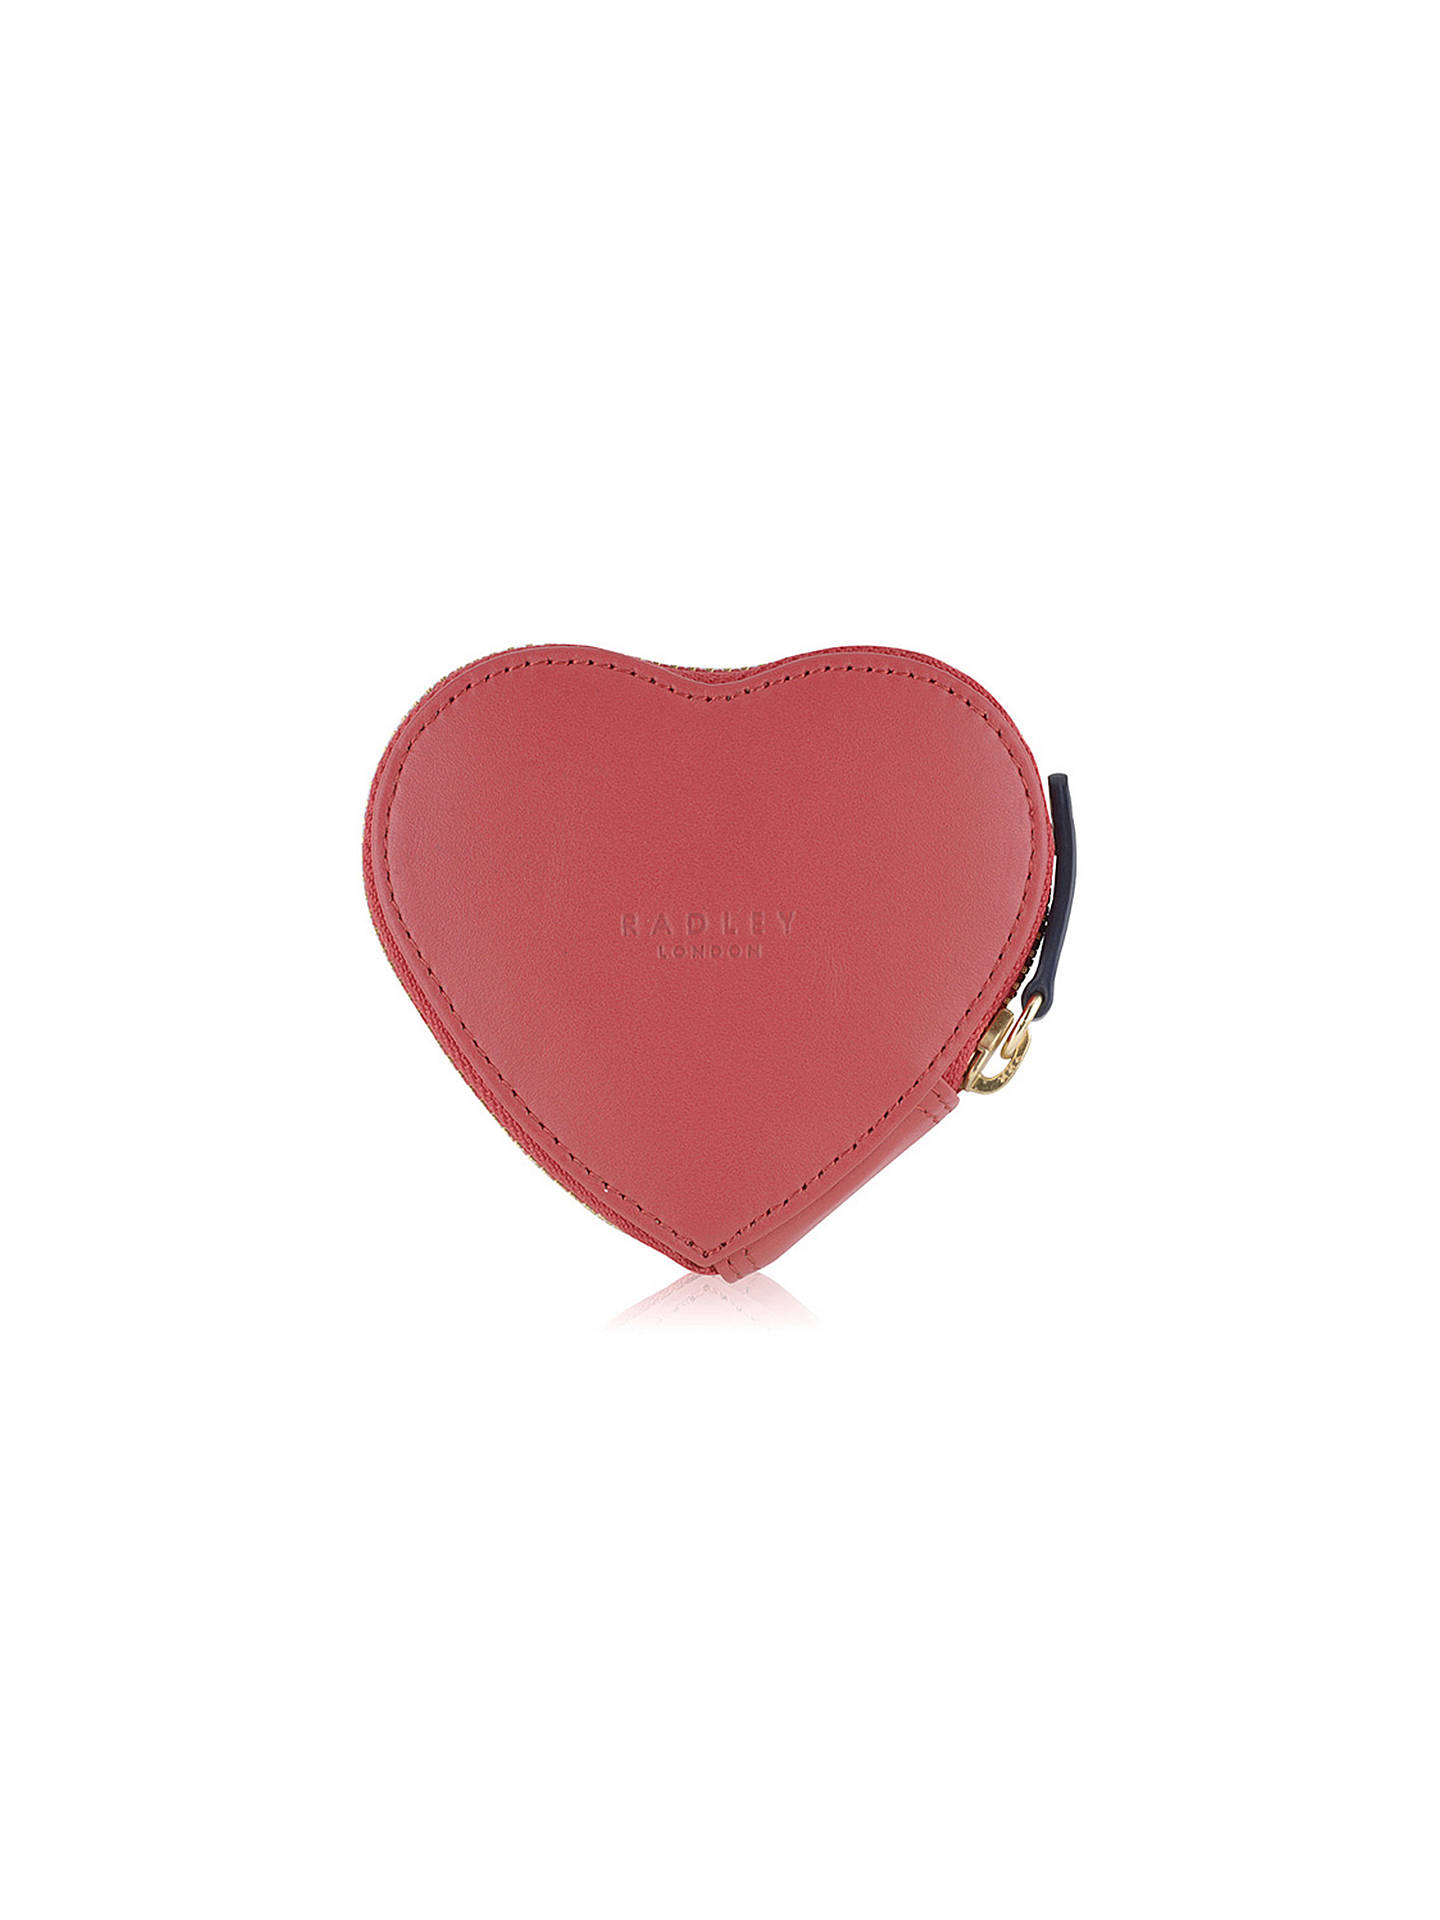 Radley Love Radley Leather Heart Coin Purse, Pink at John Lewis & Partners